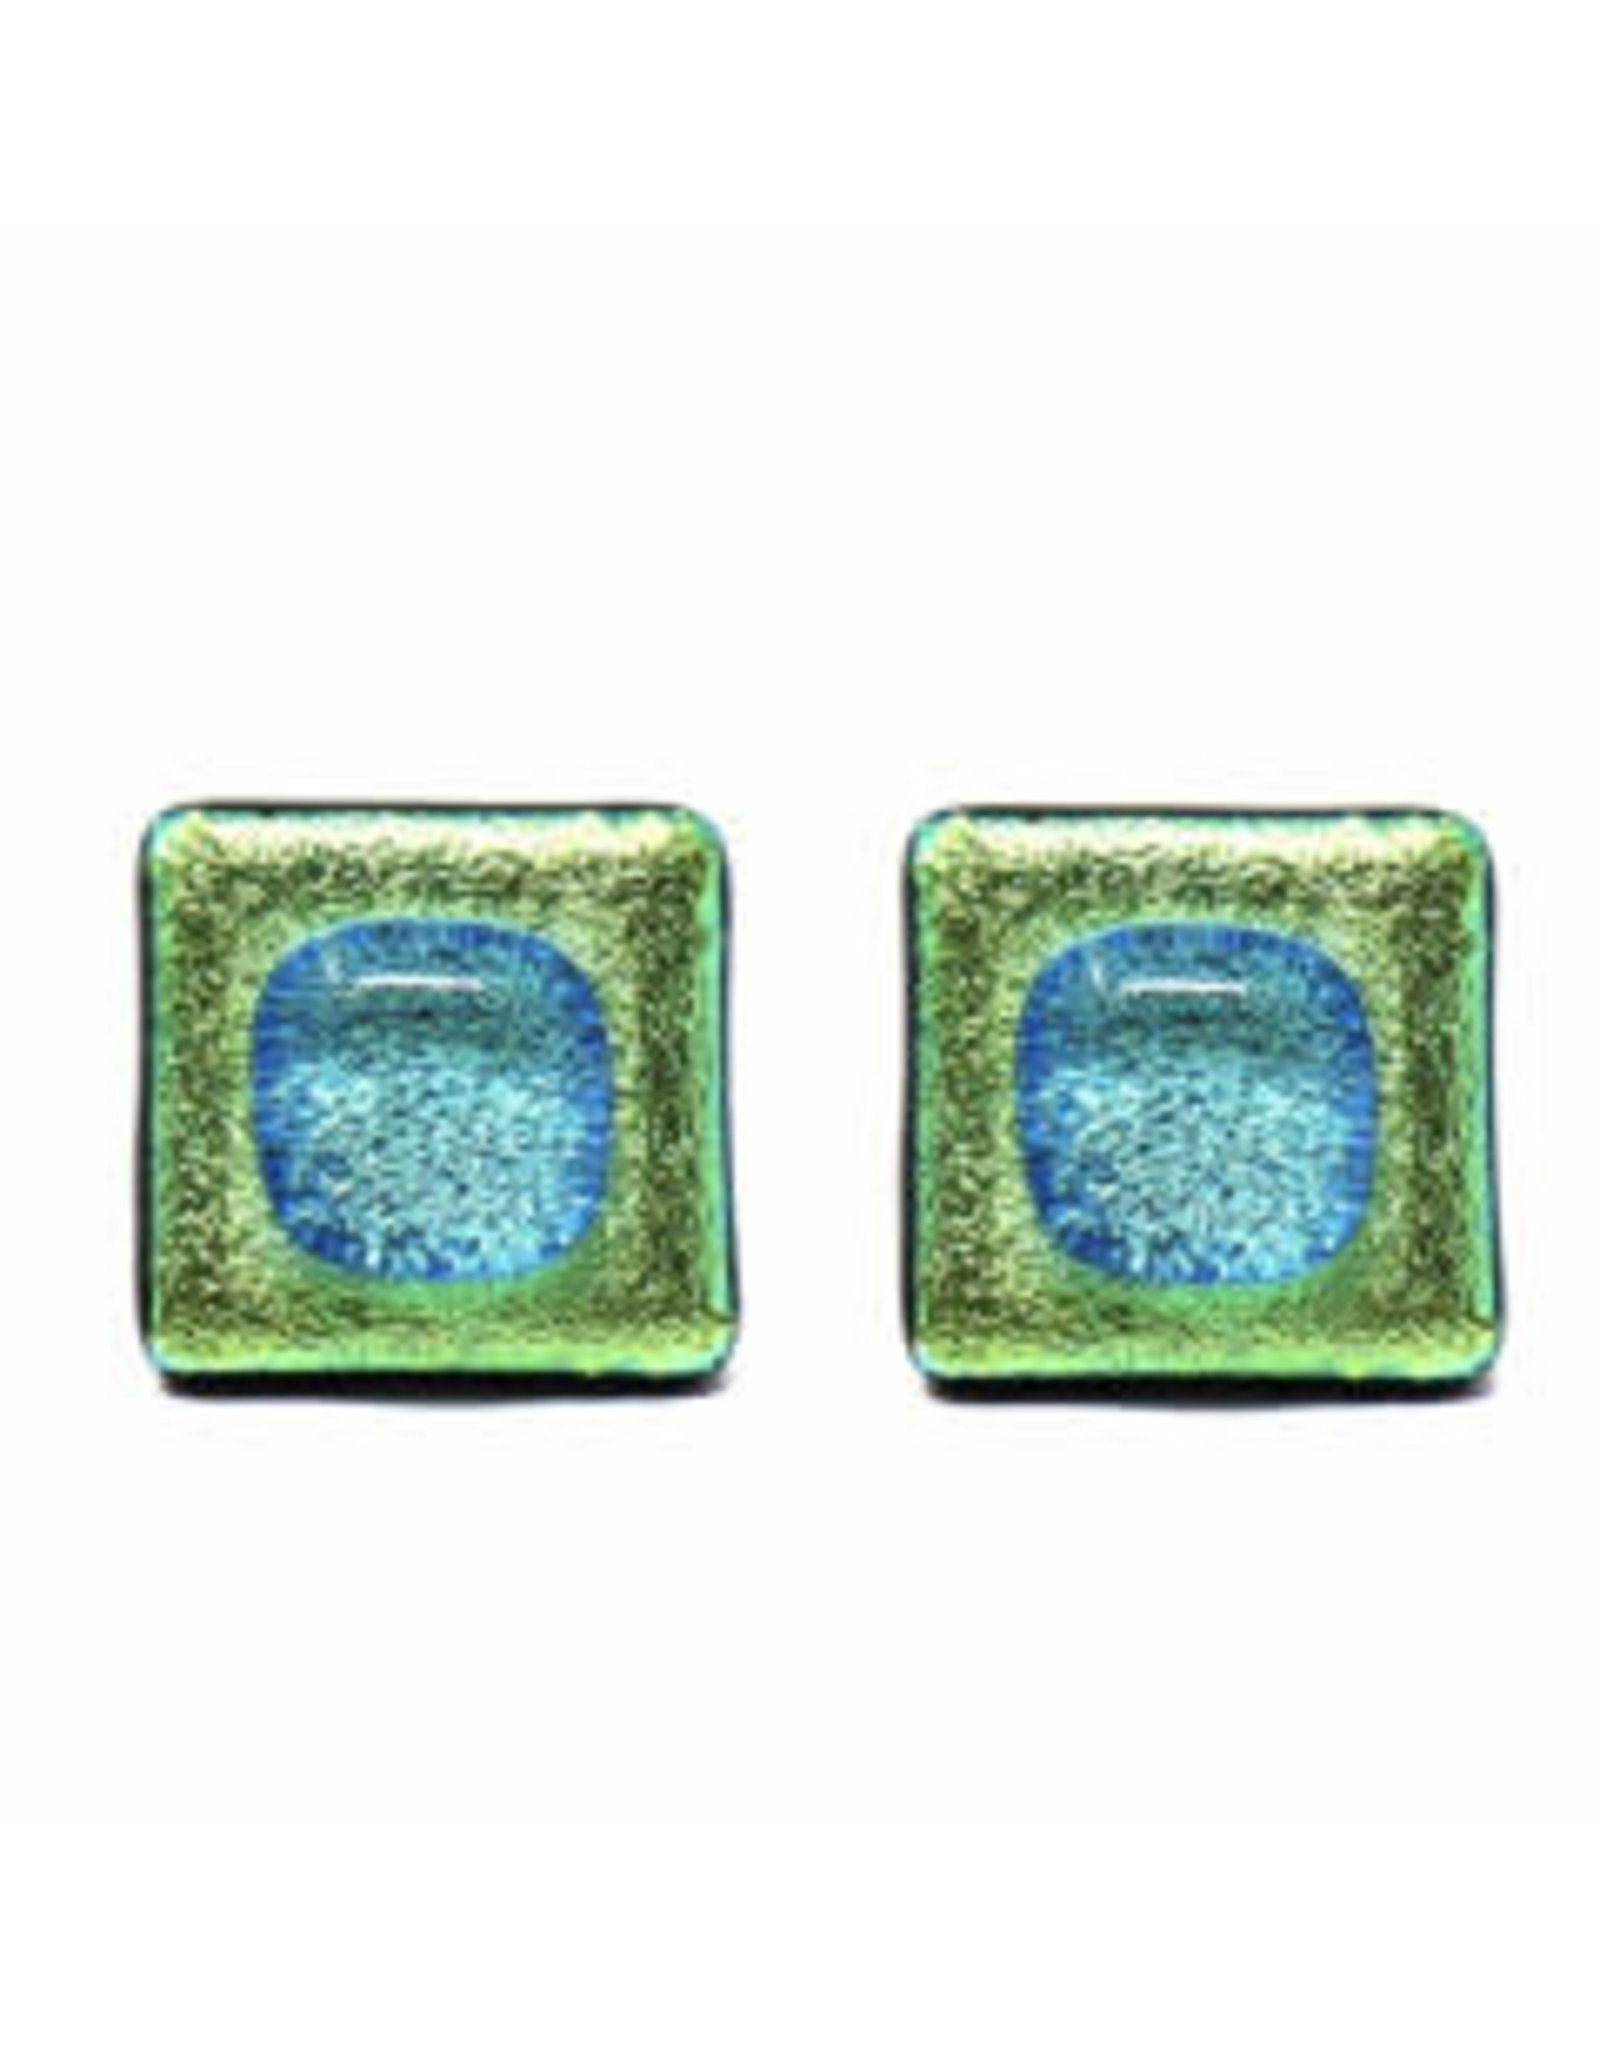 Square Glass  Stud Earrings, Chile